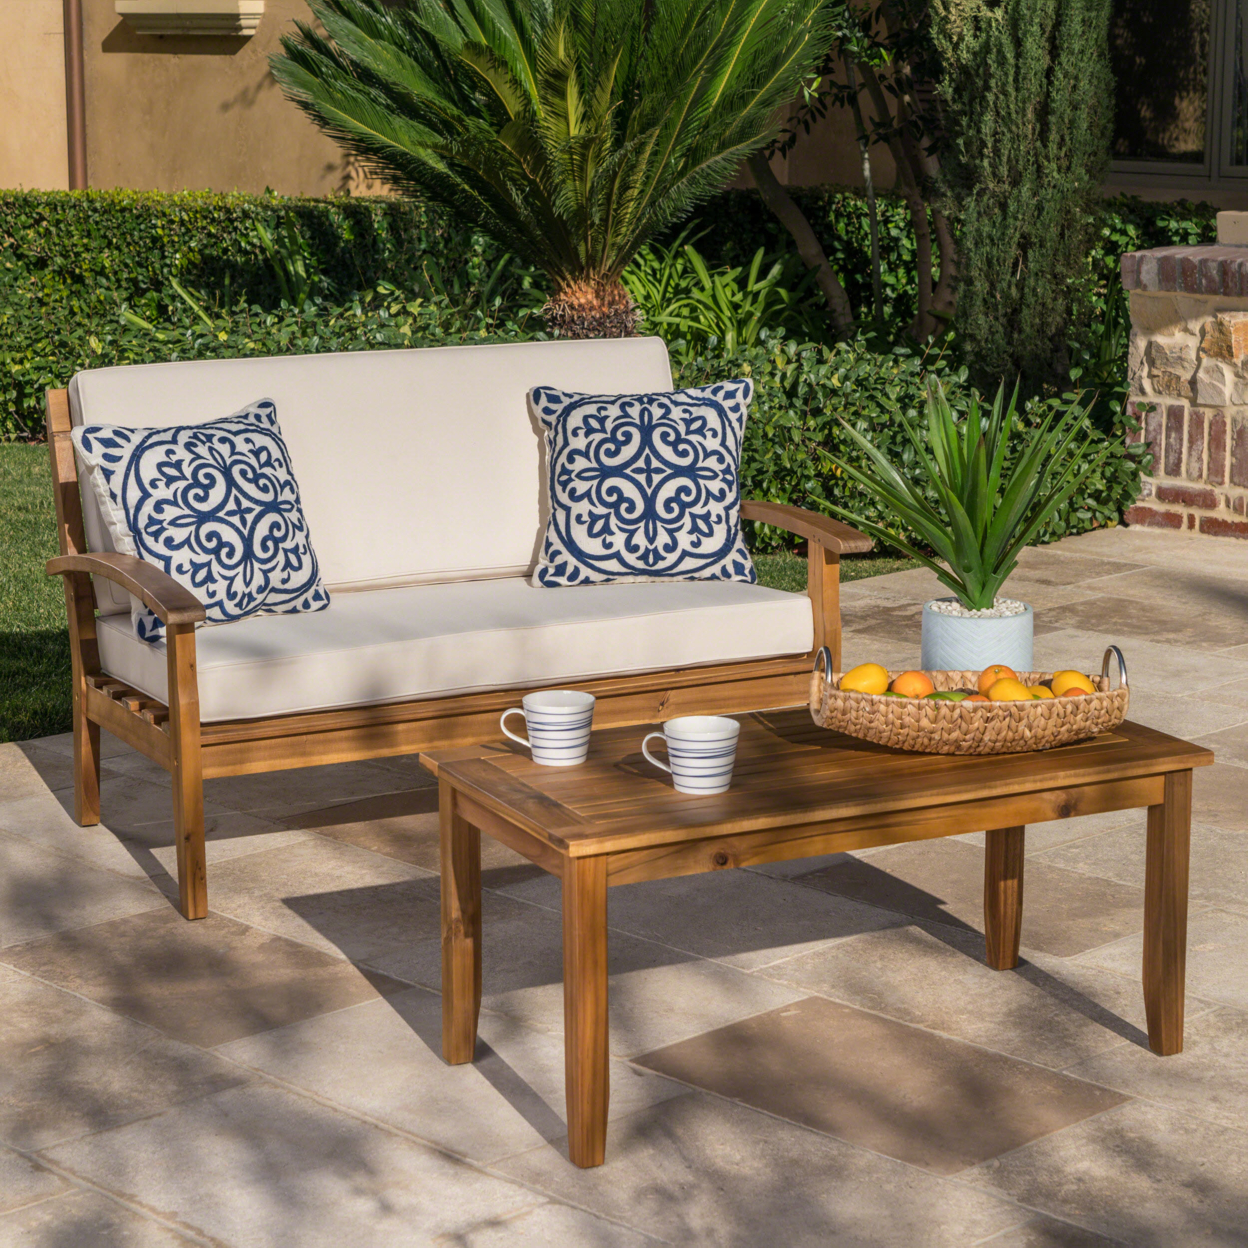 Keanu Outdoor Acacia Wood Loveseat And Coffee Table Set With Cushions - Beige